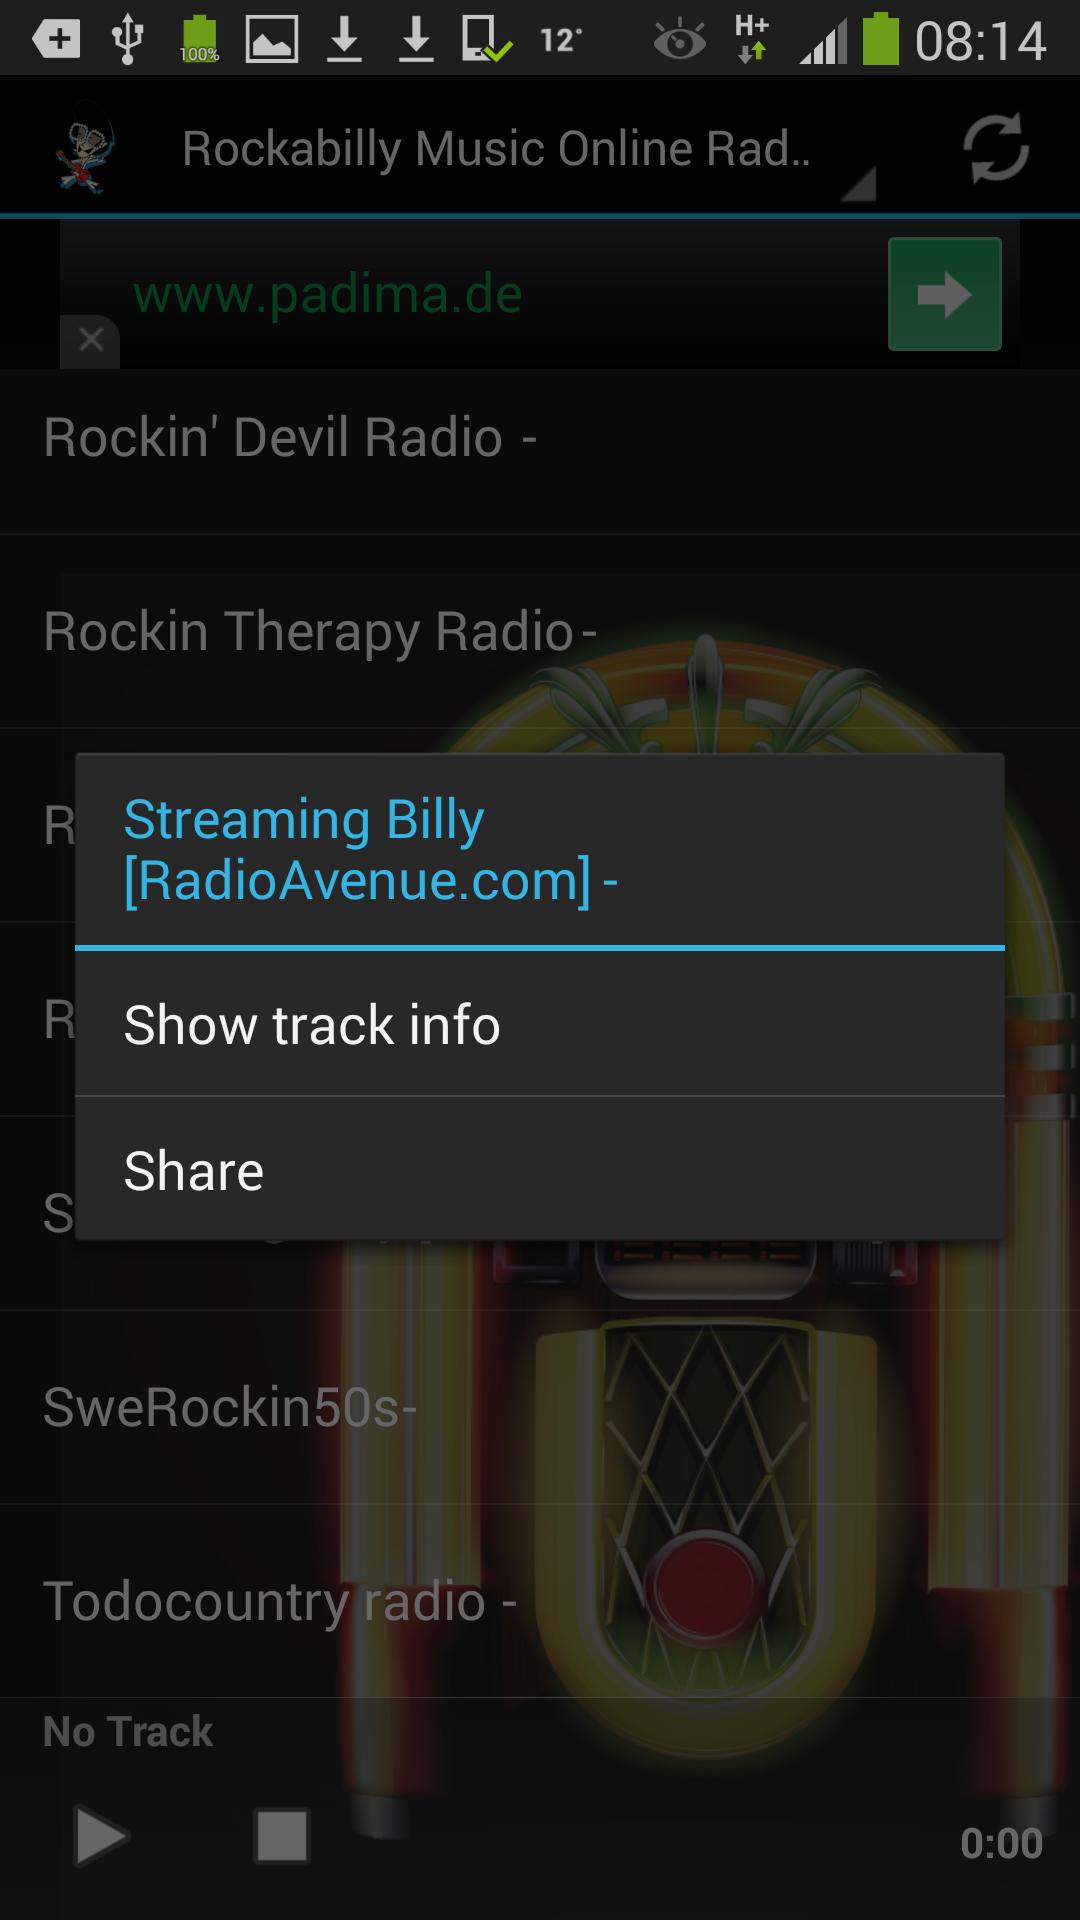 Rockabilly Music Online Radio for Android - APK Download